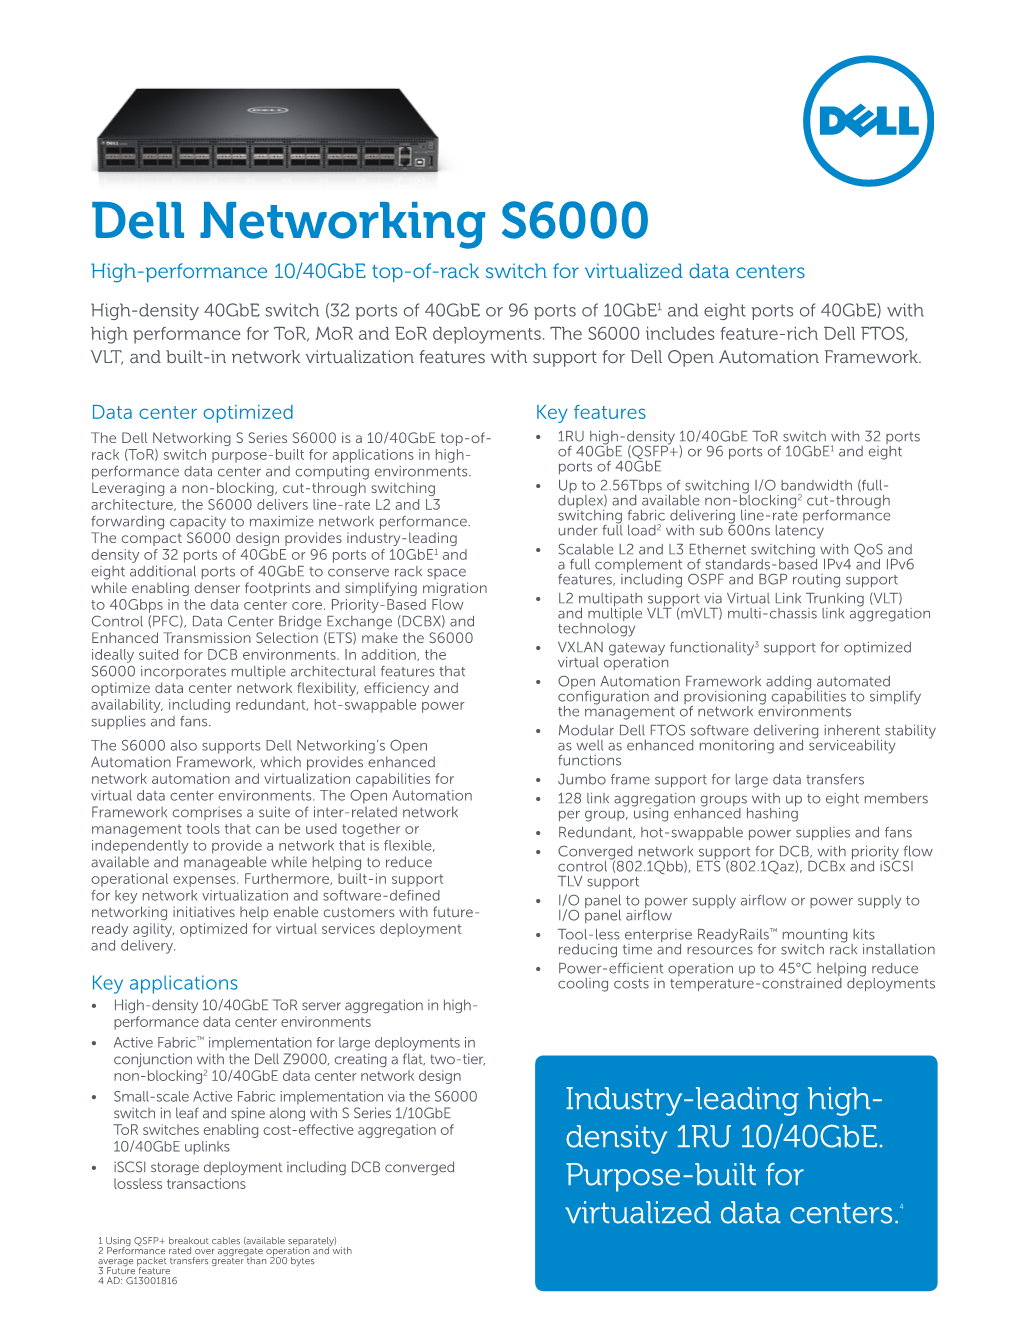 Dell Networking S6000 High-Performance 10/40Gbe Top-Of-Rack Switch for Virtualized Data Centers